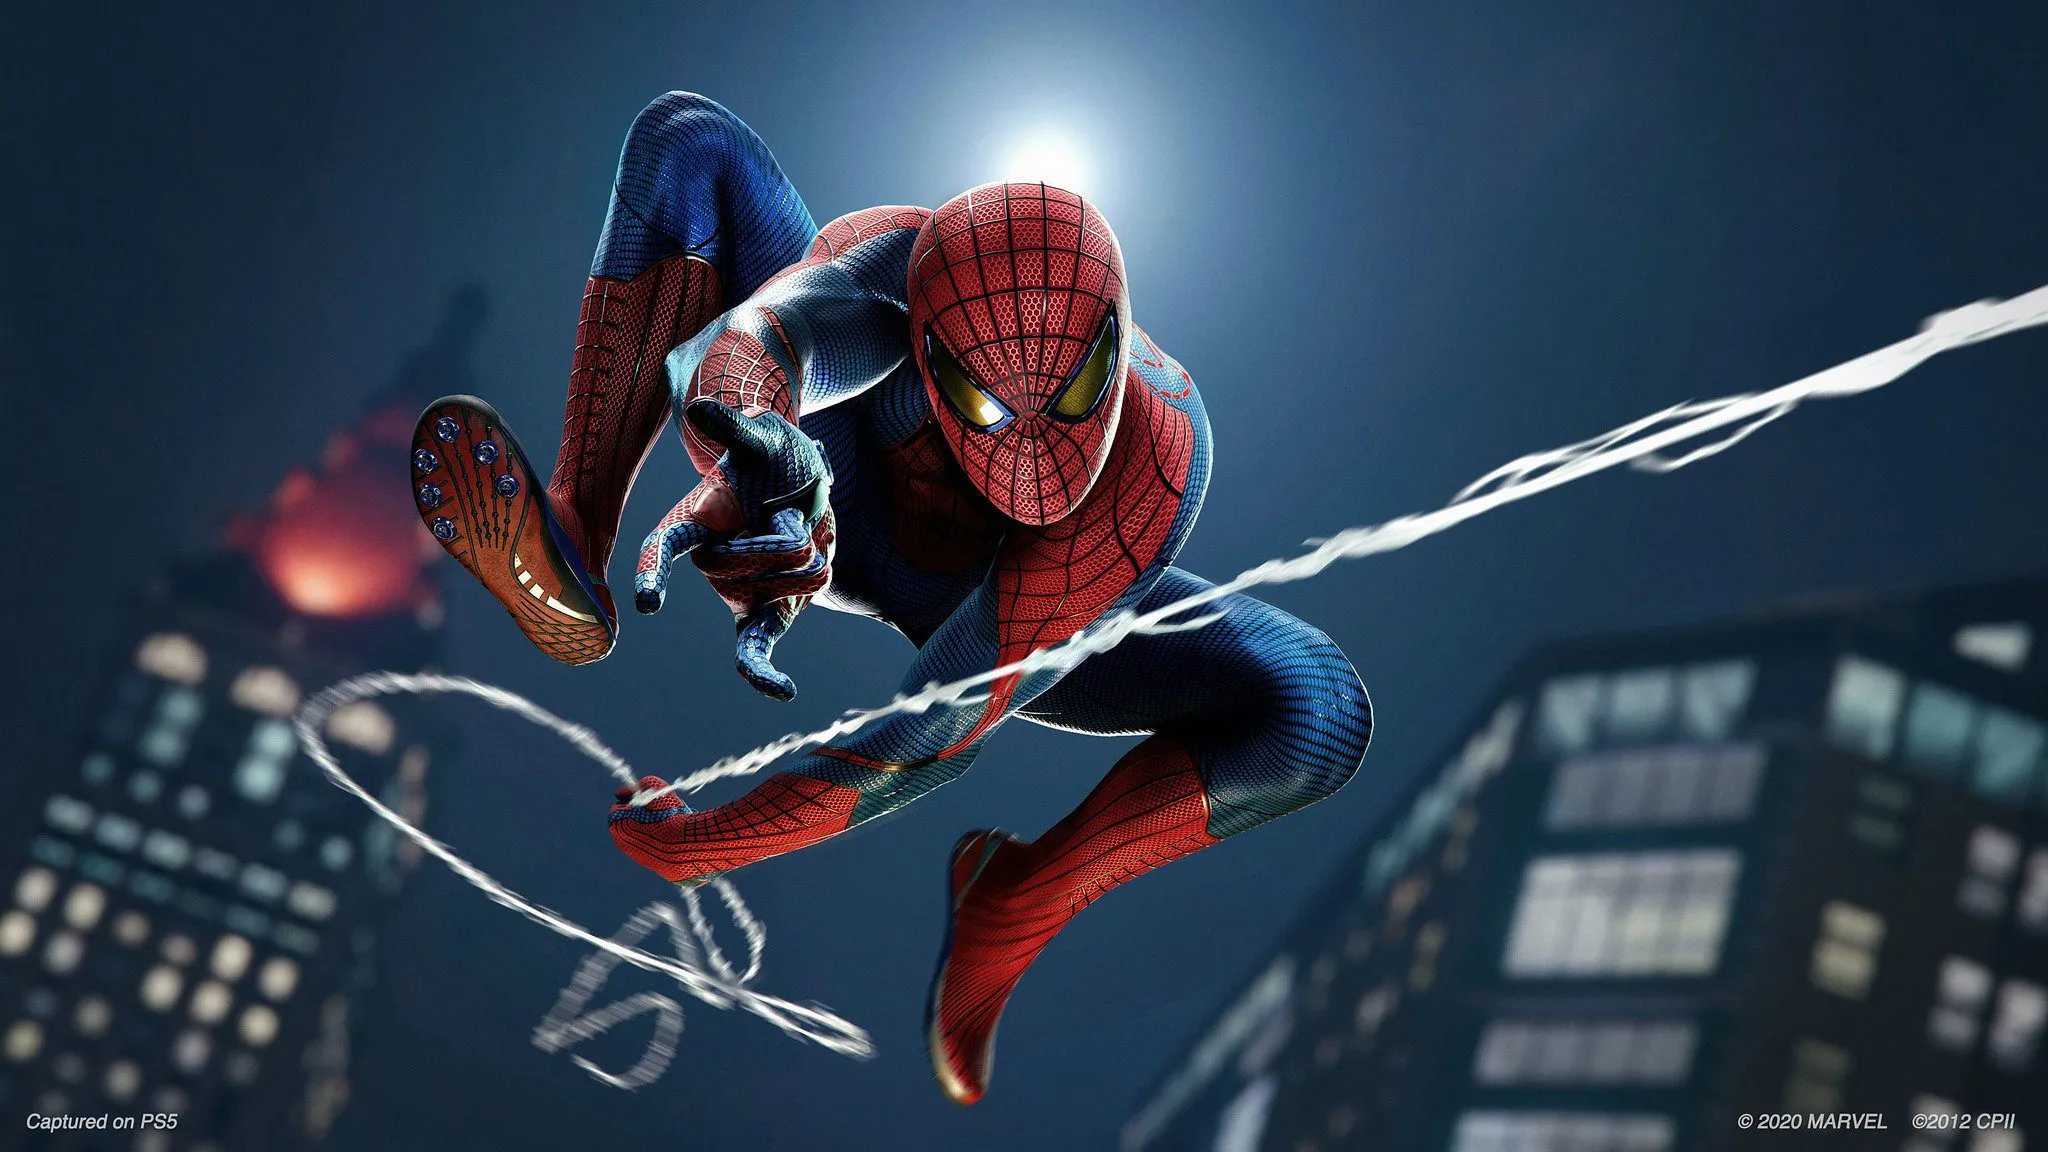 Marvel’s Spider-Man Remastered is getting a standalone PS5 release